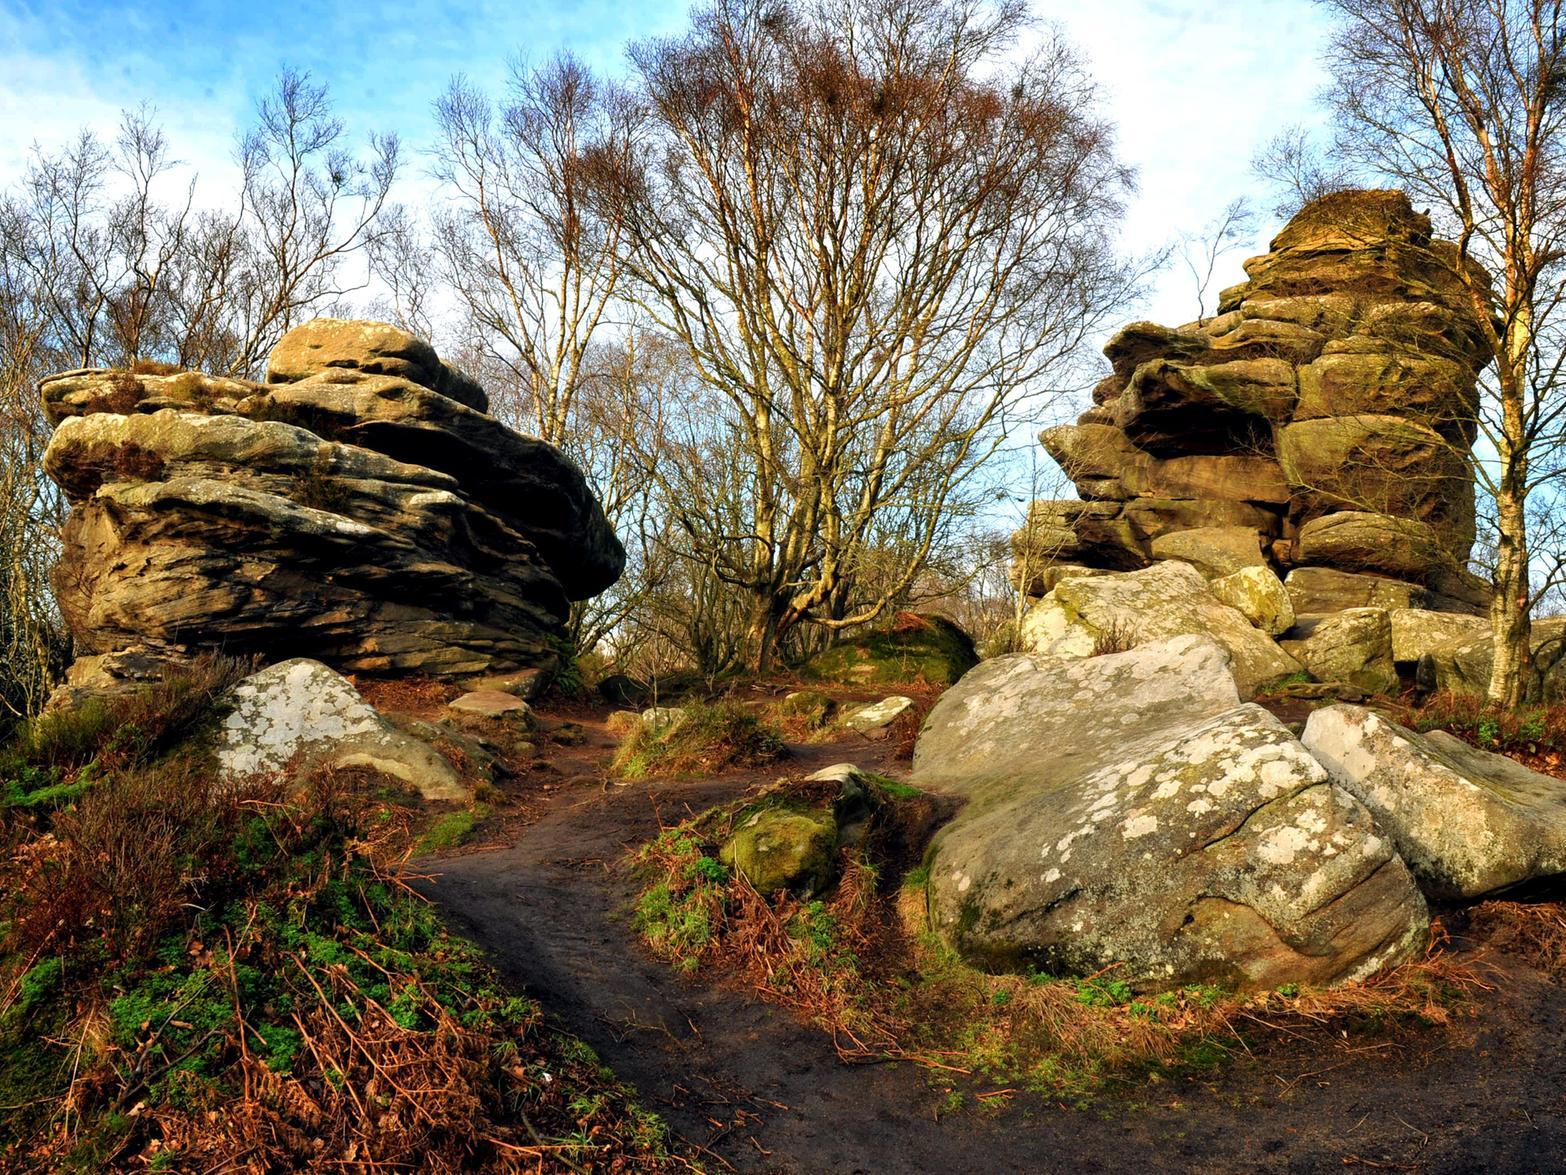 If you're looking for something a little more adventurous, why not head to Brimham Rocks in Nidderdale. Climb the weird and wonderful rock formations, walk around the grounds and take in the incredible rolling countryside views.